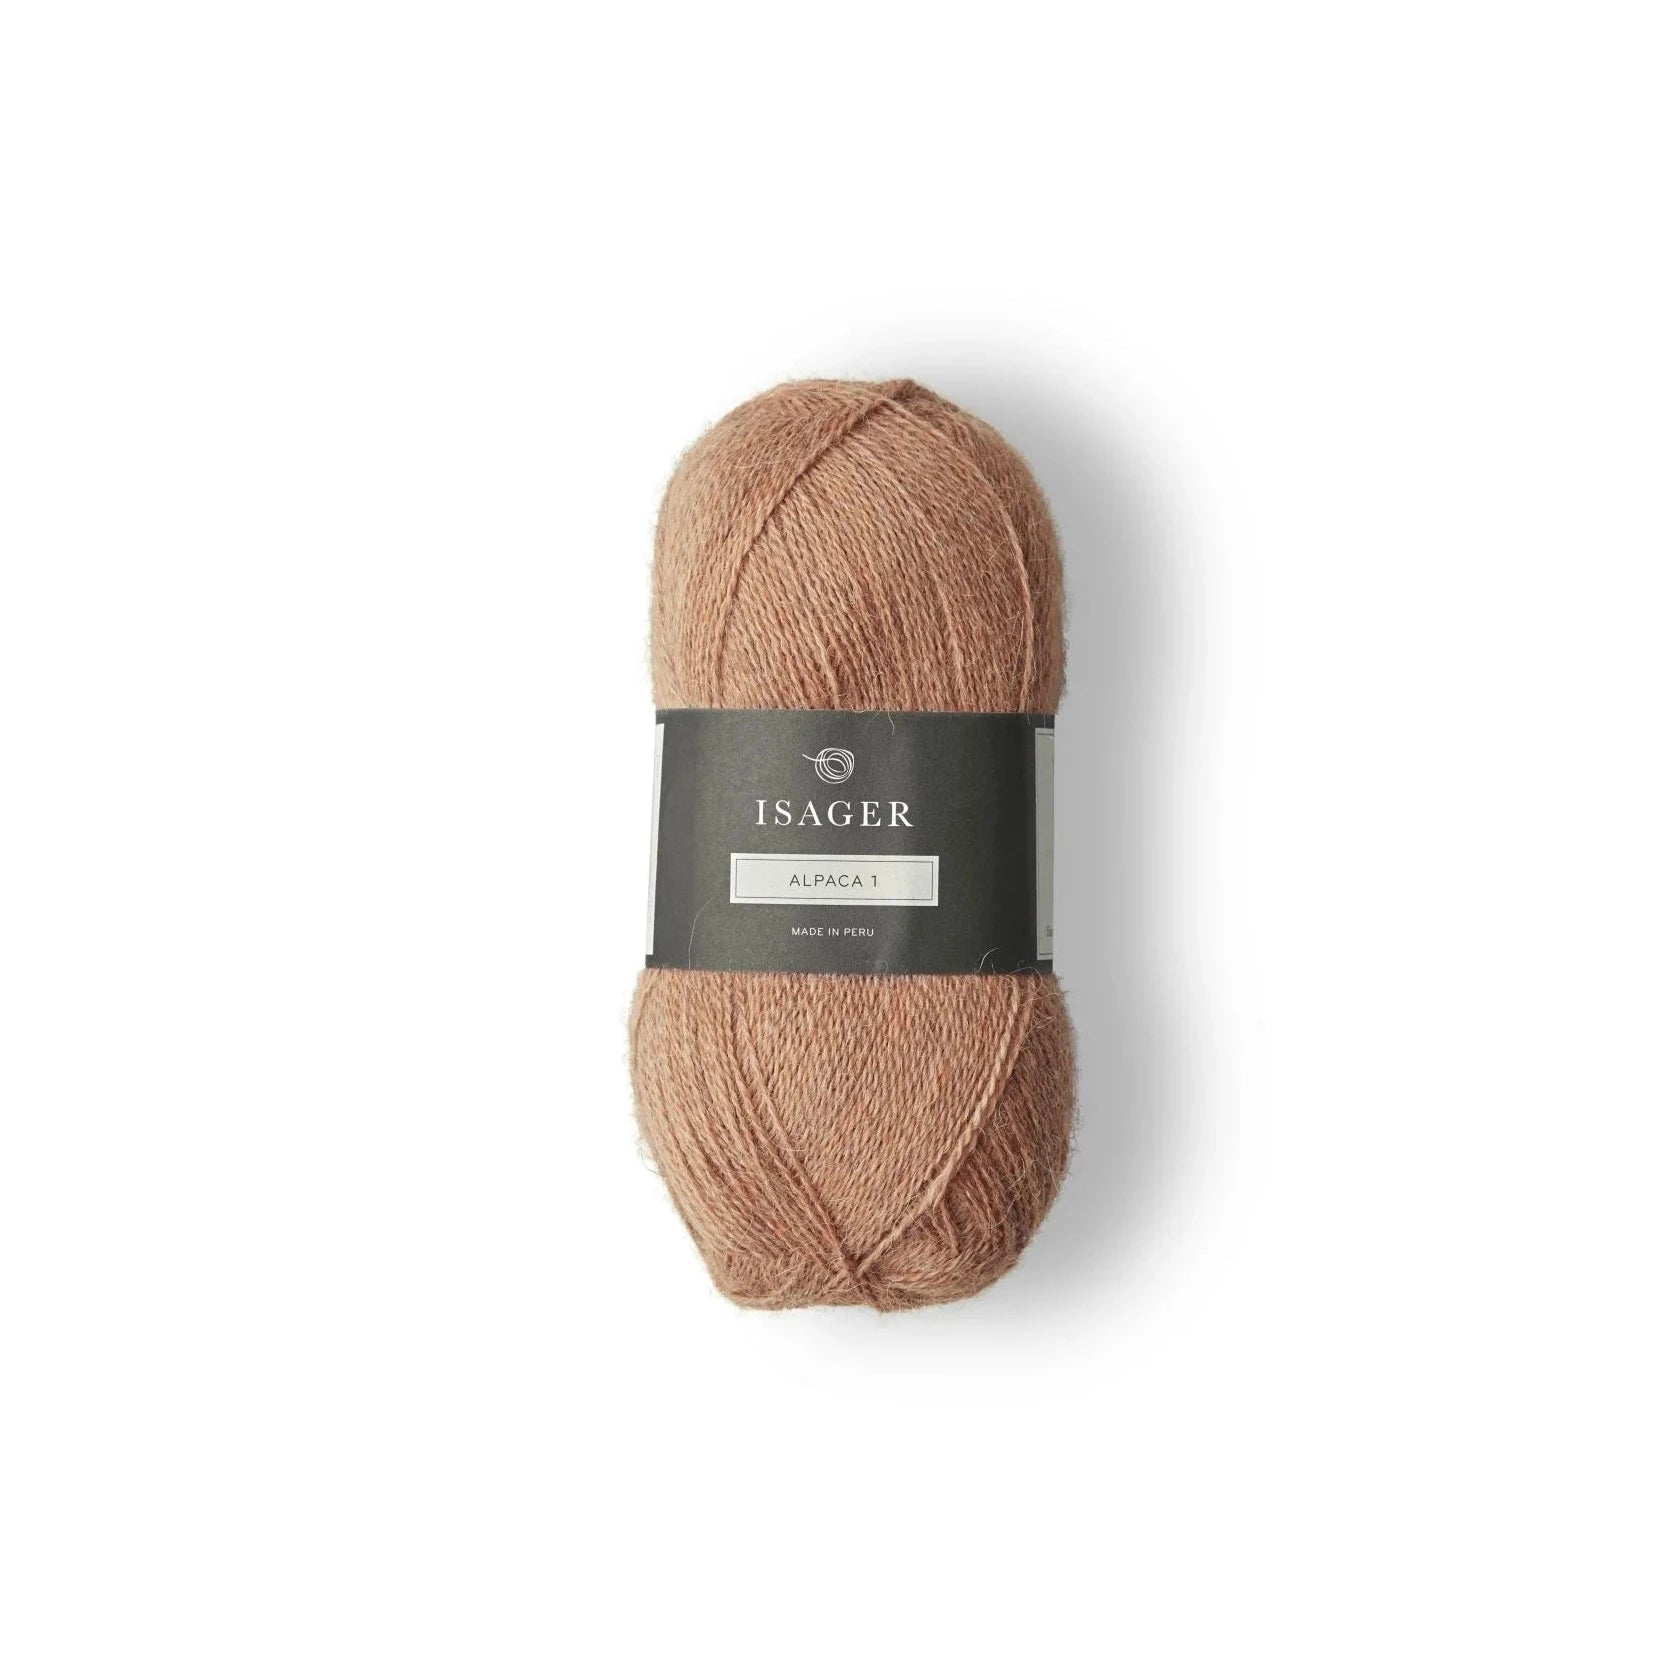 Isager Alpaca 1 - Isager - Peach - The Little Yarn Store